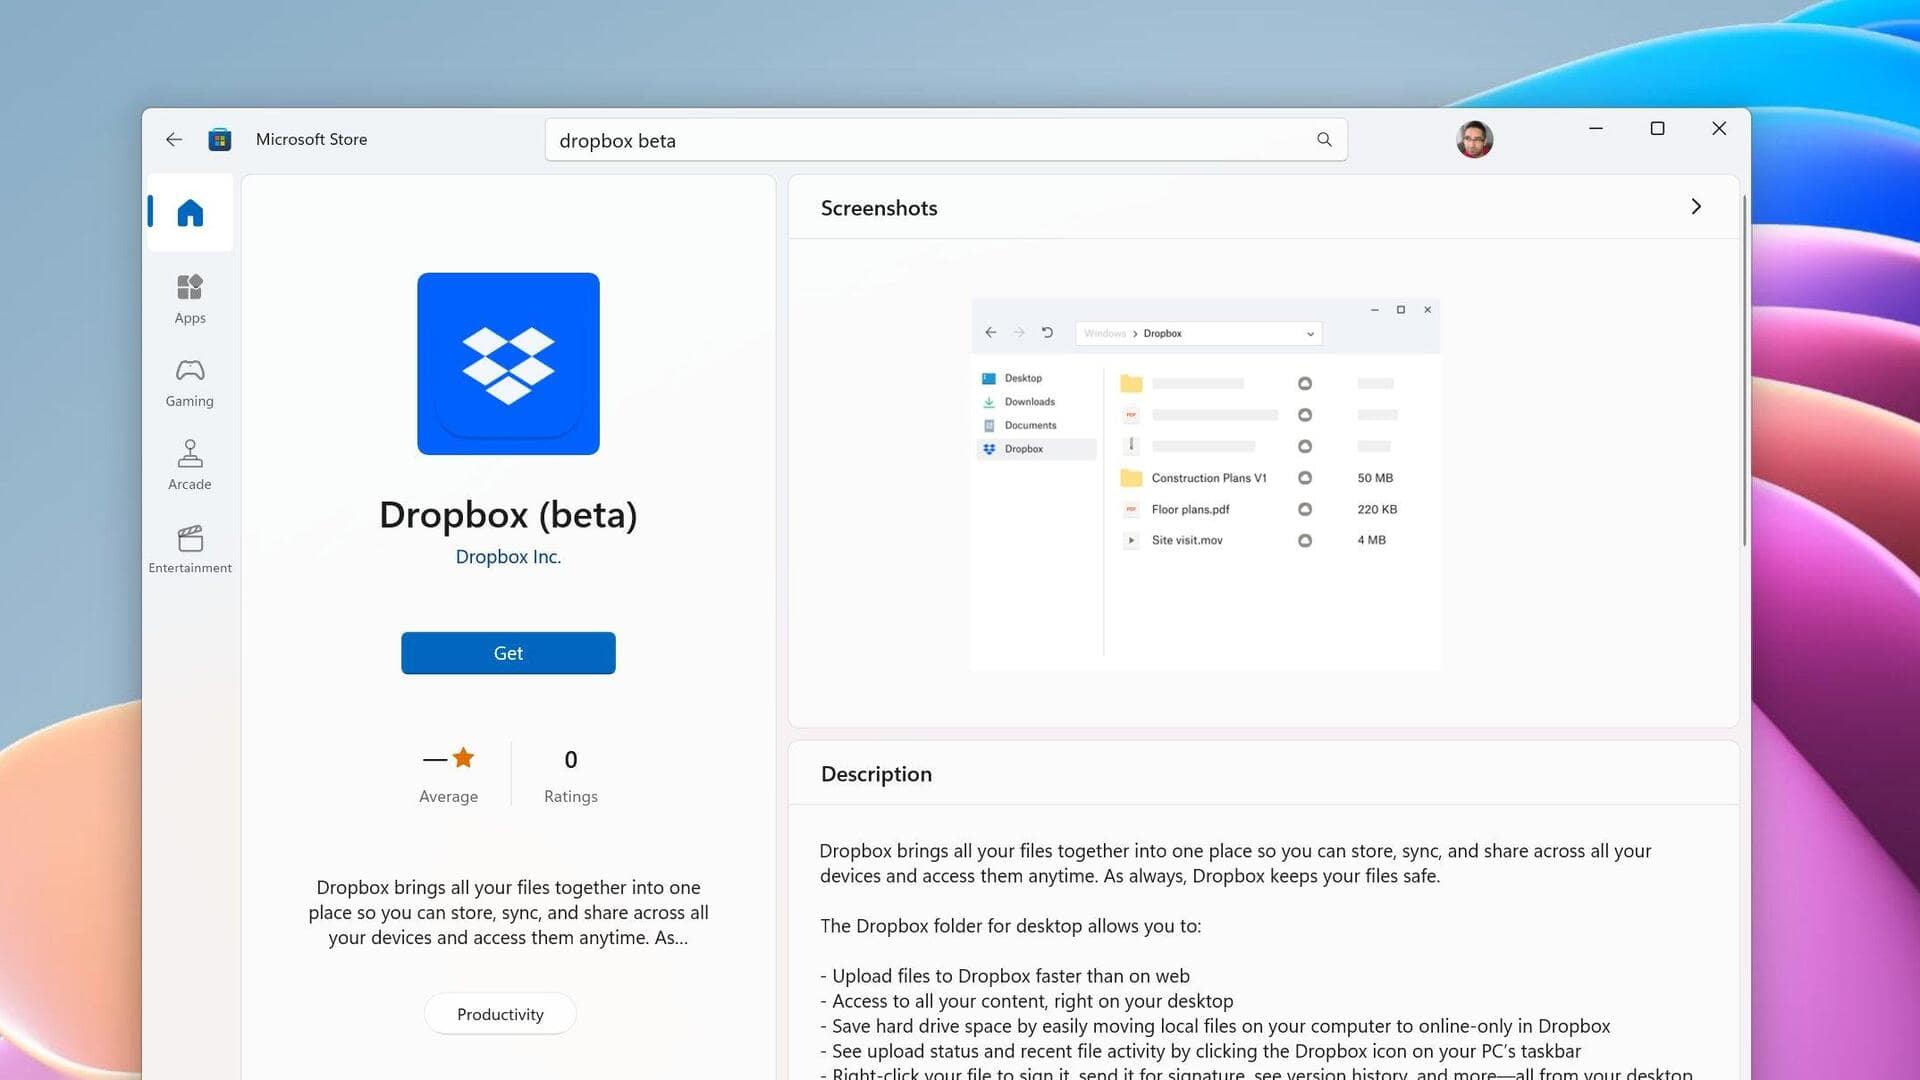 Dropbox is now available on Microsoft Store: Check download instructions